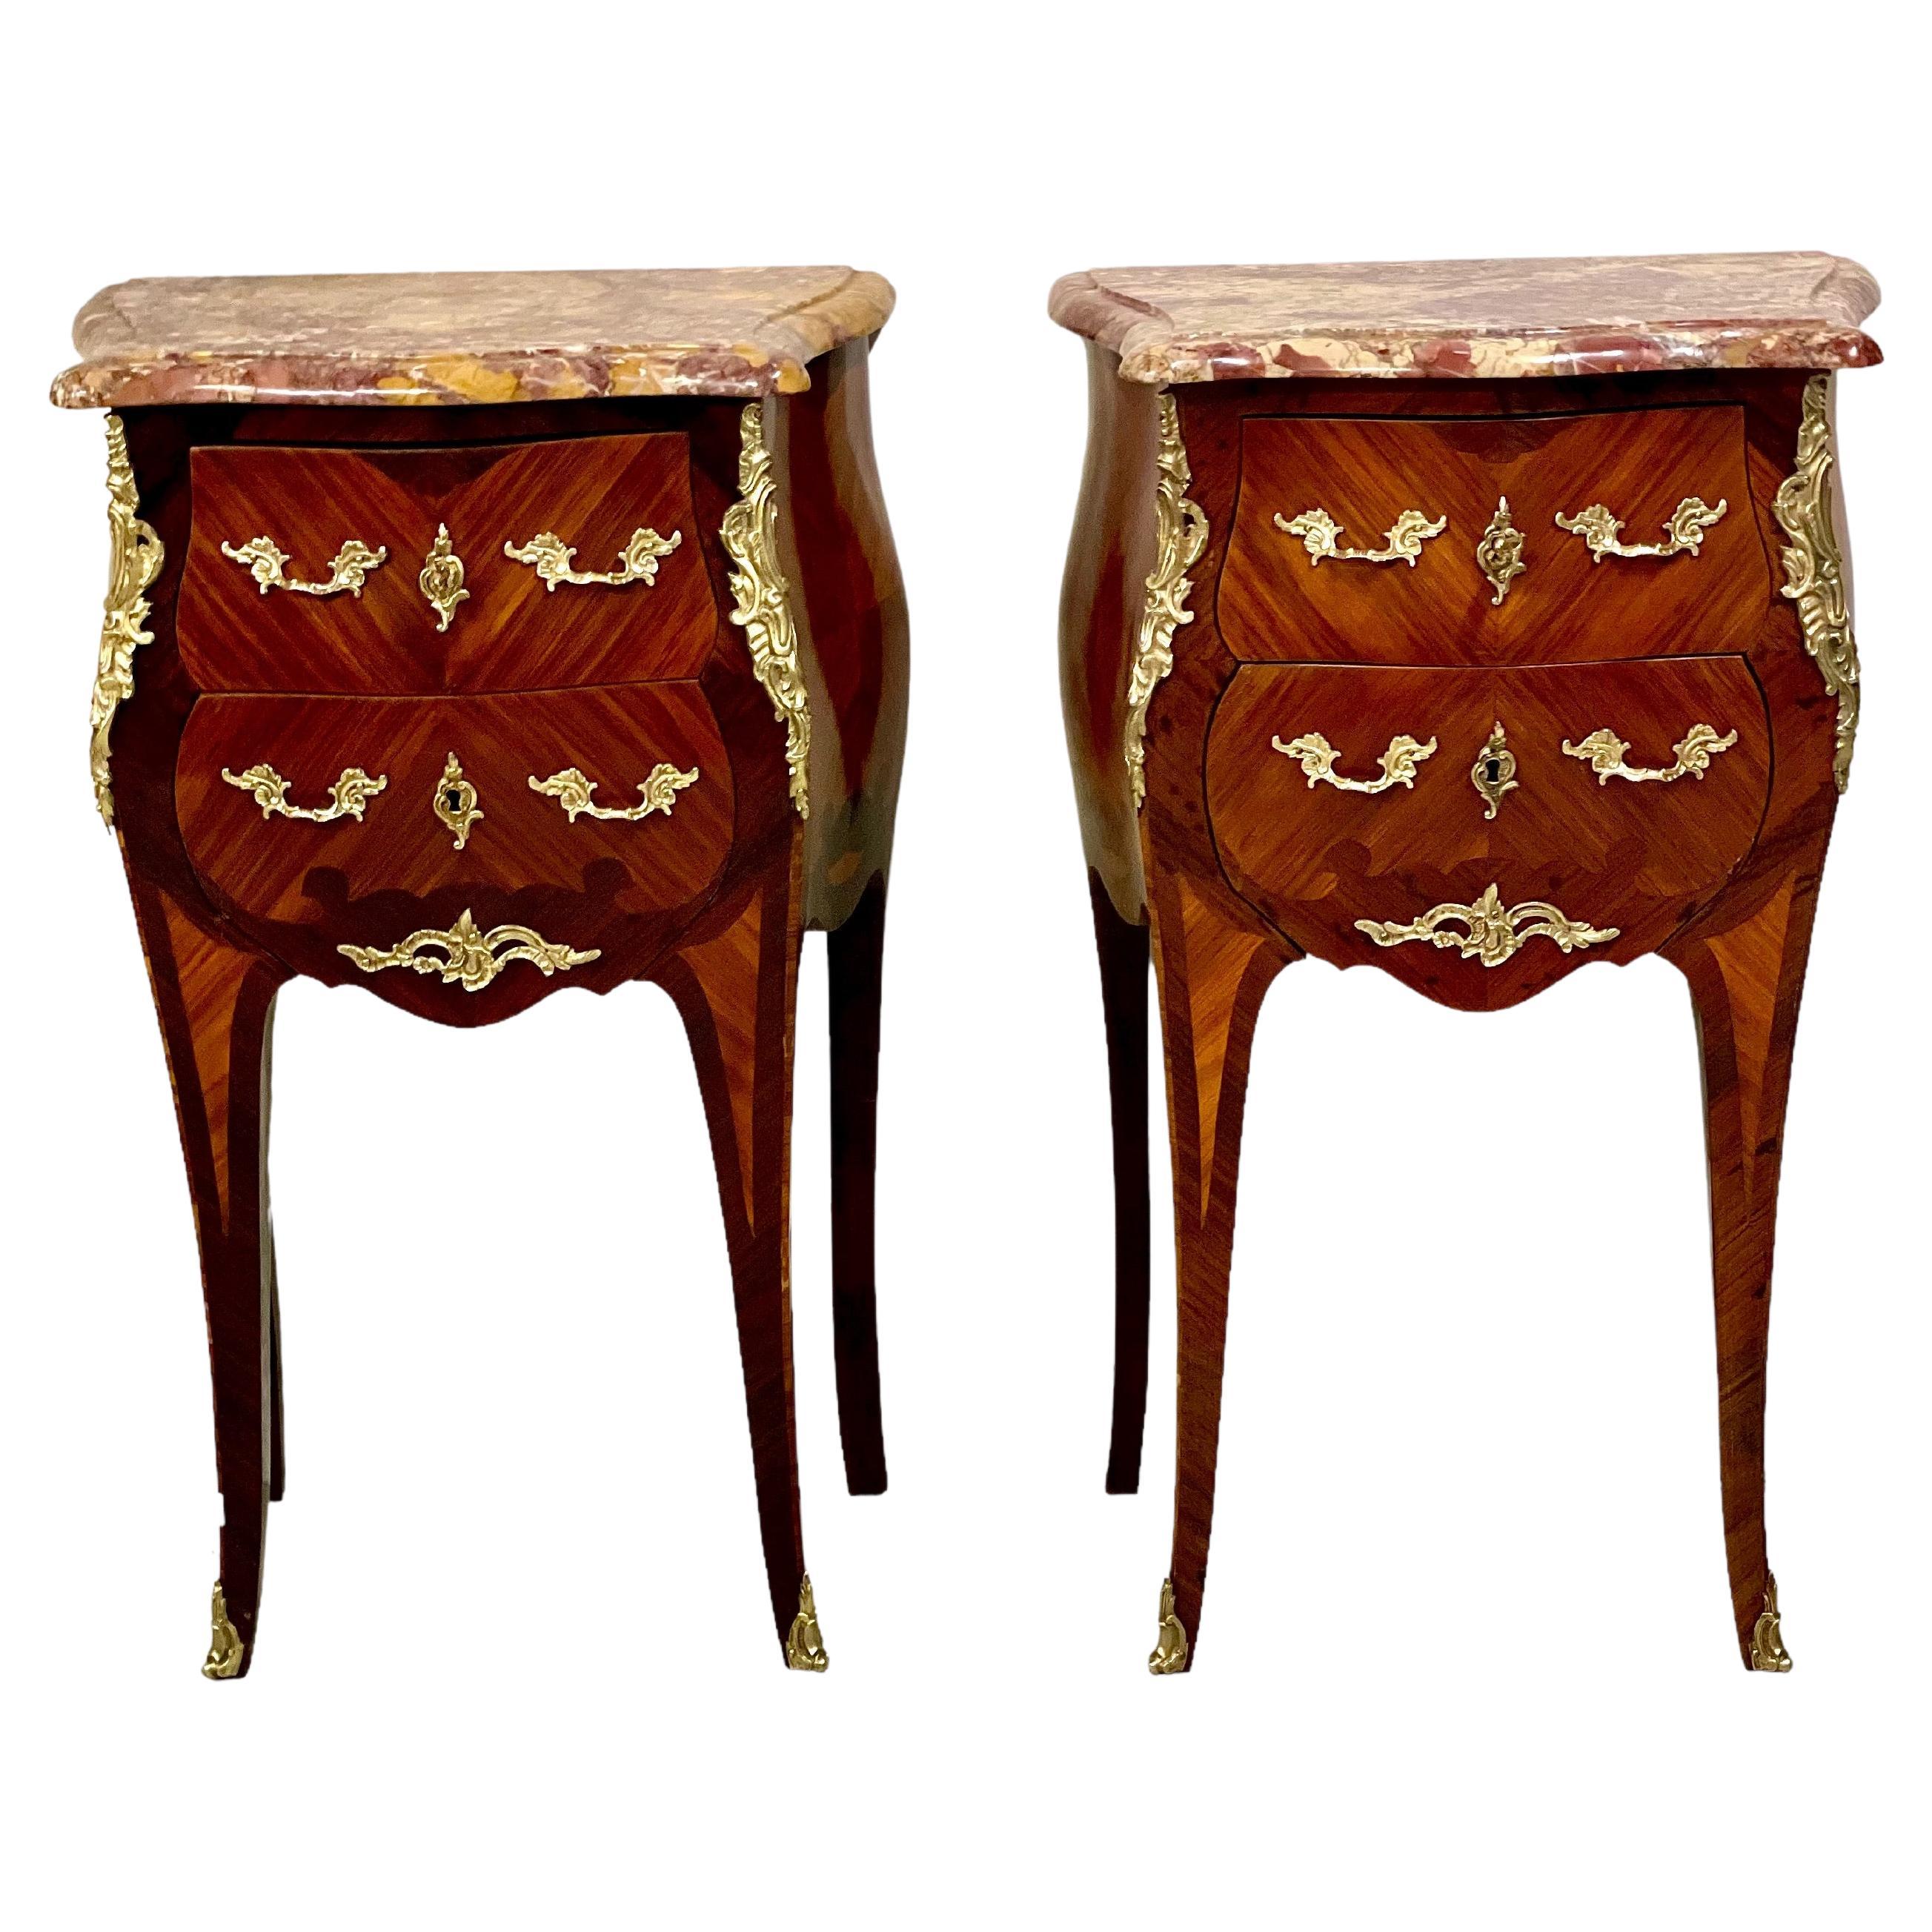 19th C. Pair of French Louis XV Style Petites Commodes with Marble Top